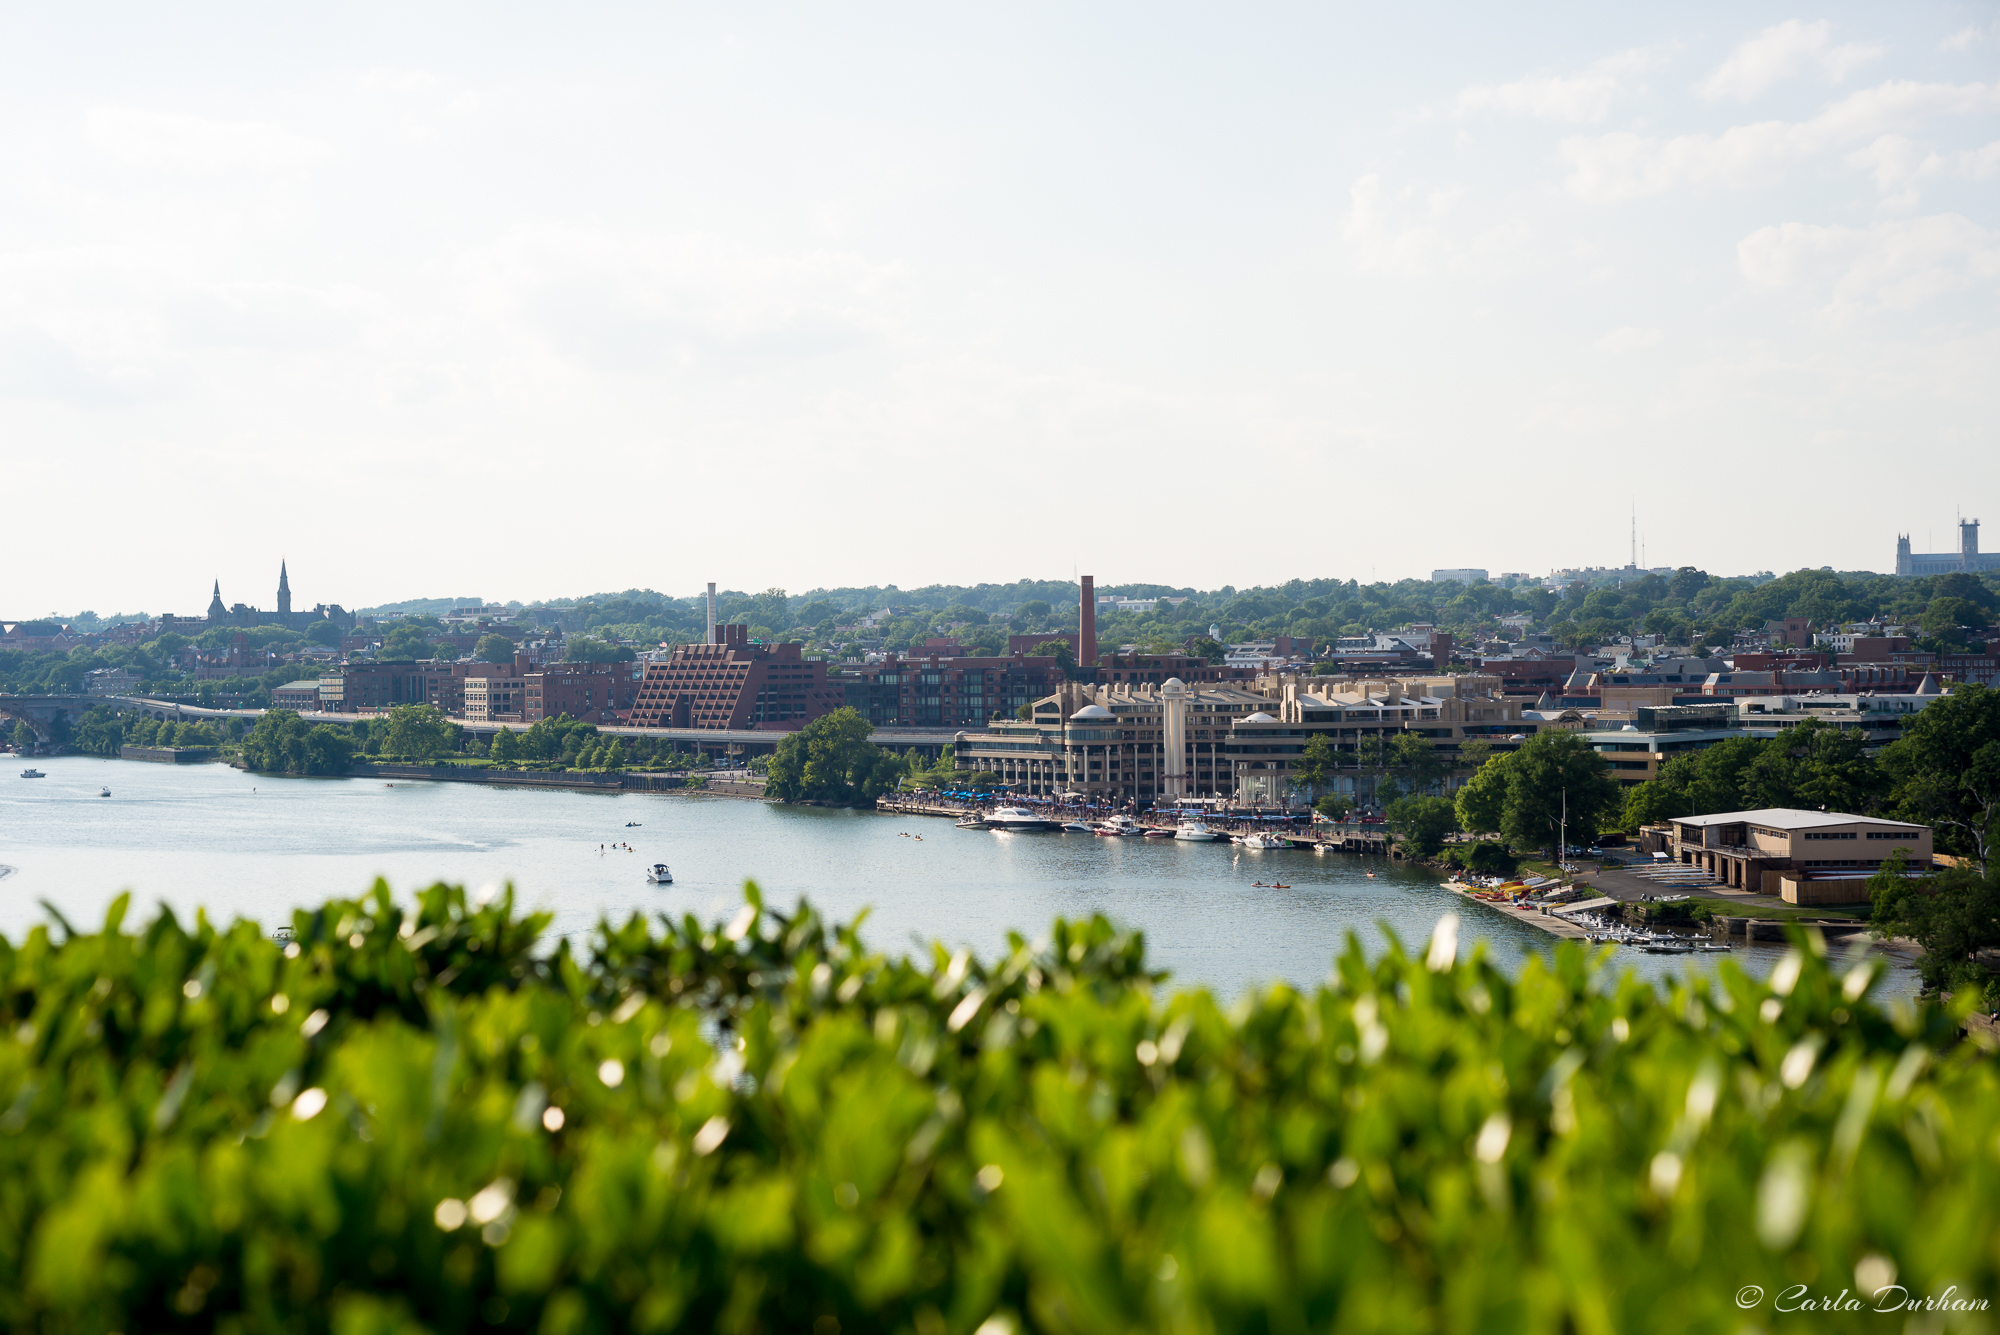 Views from the Kennedy Center roof top terrace - Photographer Carla Durham - Carla in the City